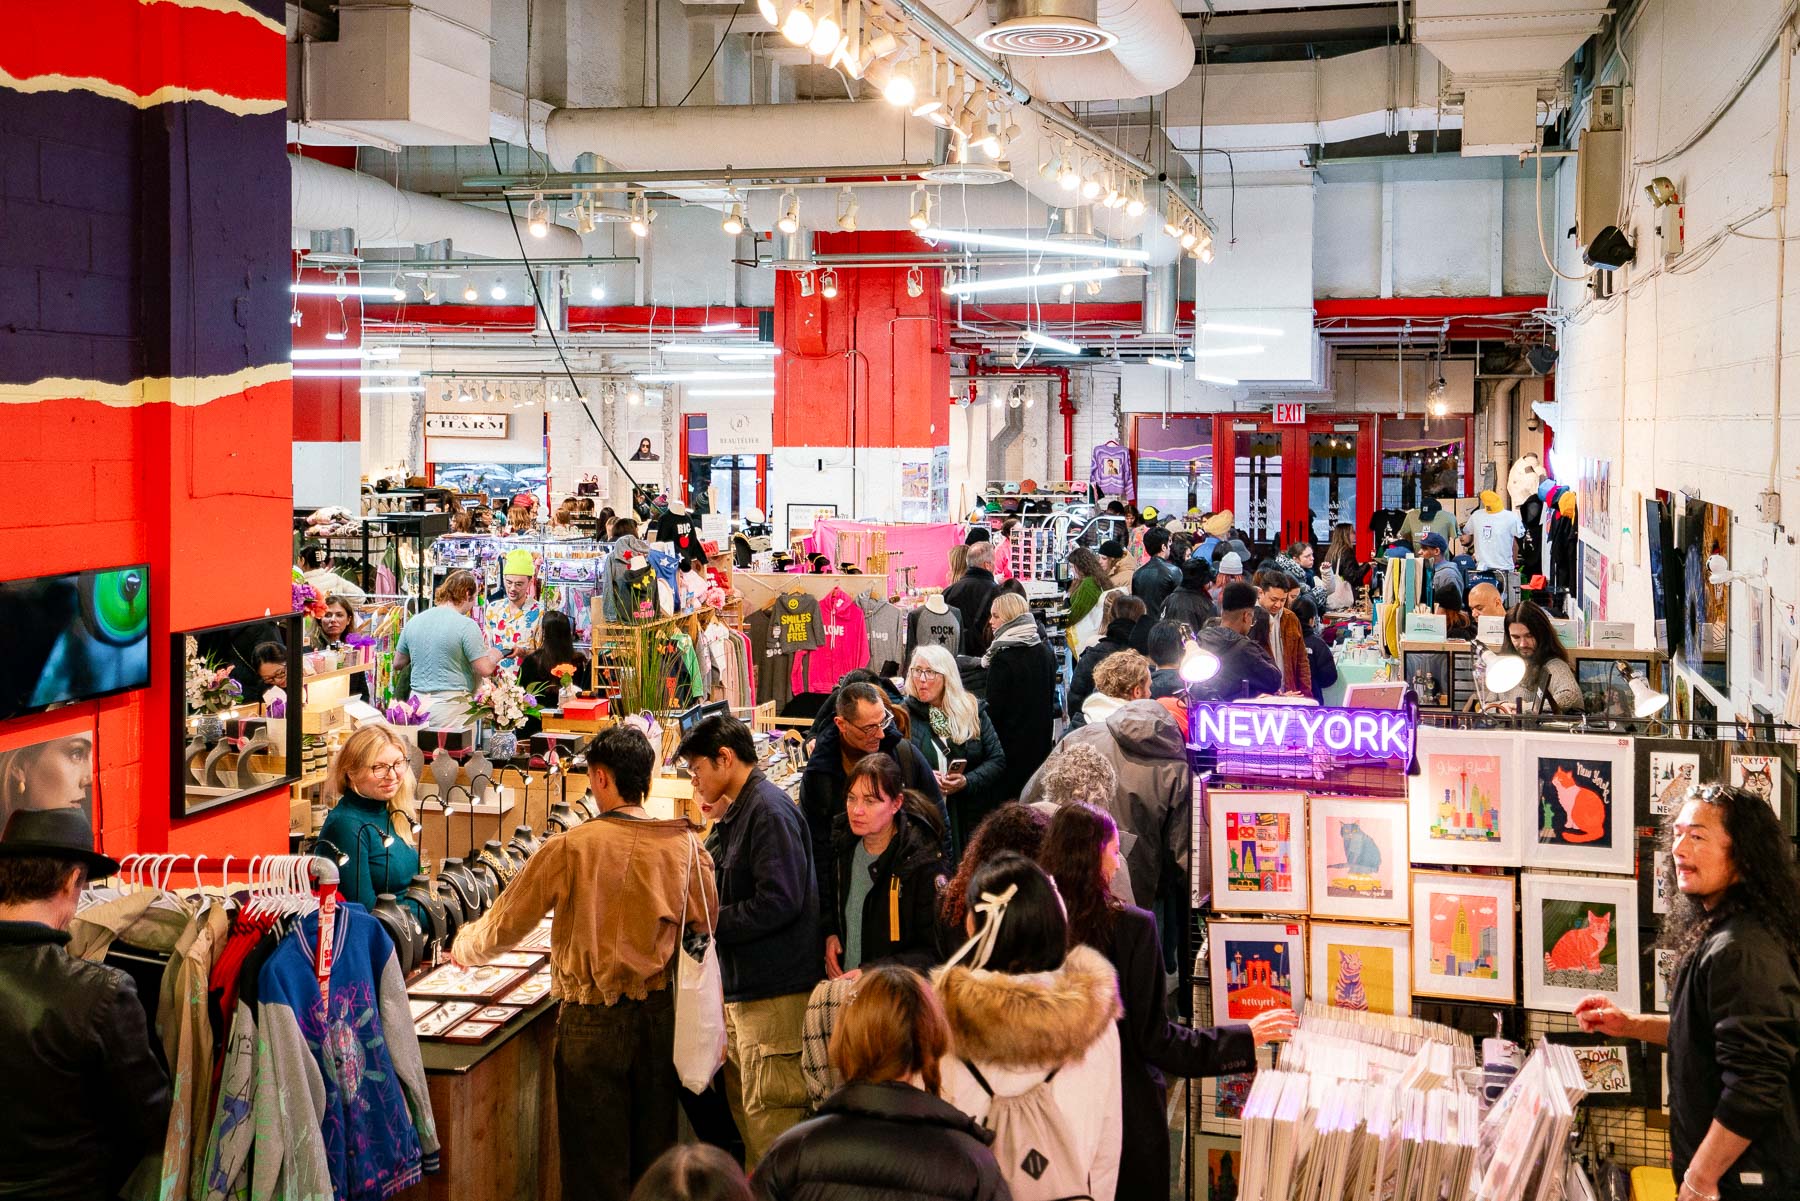 People shop the many vendors, including painters, clothing designers, and photographers, at Artists & Fleas Chelsea Market, one of the best gift shops for souvenirs in NYC